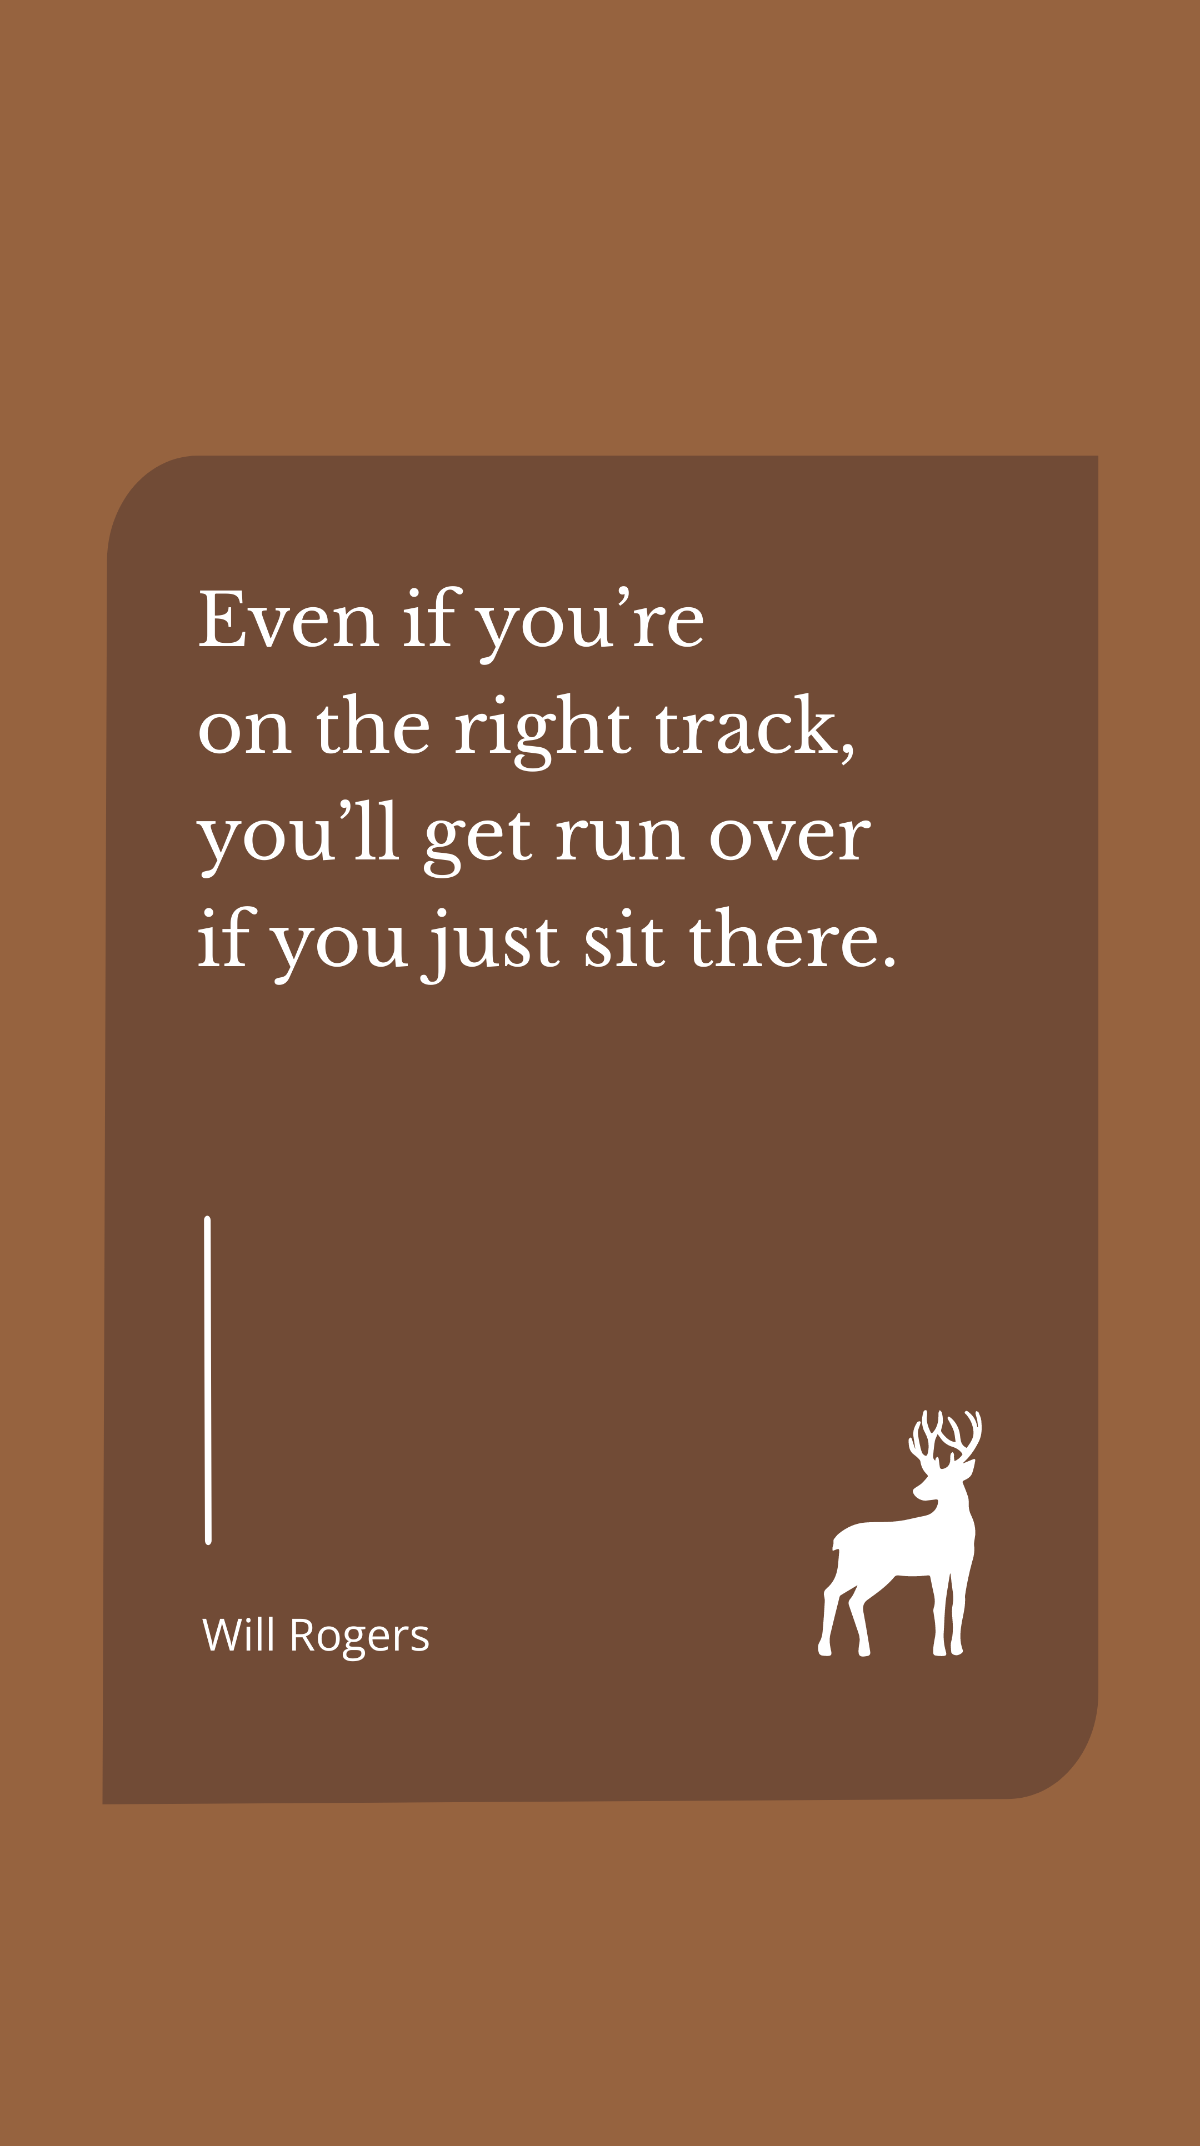 Will Rogers - Even if you’re on the right track, you’ll get run over if you just sit there